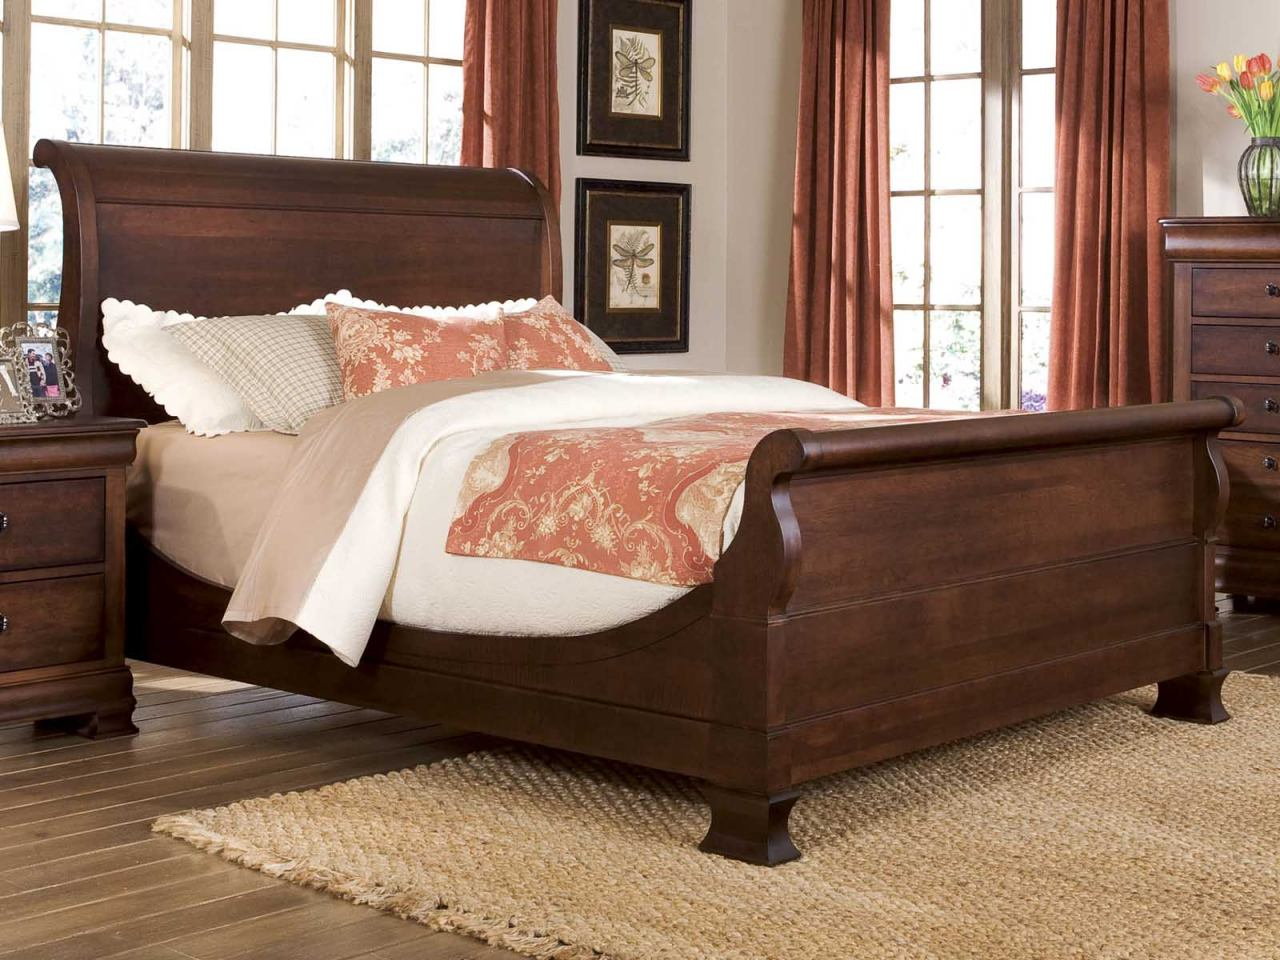 Durham Furniture Vineyard Creek King Master Sleigh Bed In Antique Rye 112 149 pertaining to proportions 1280 X 960